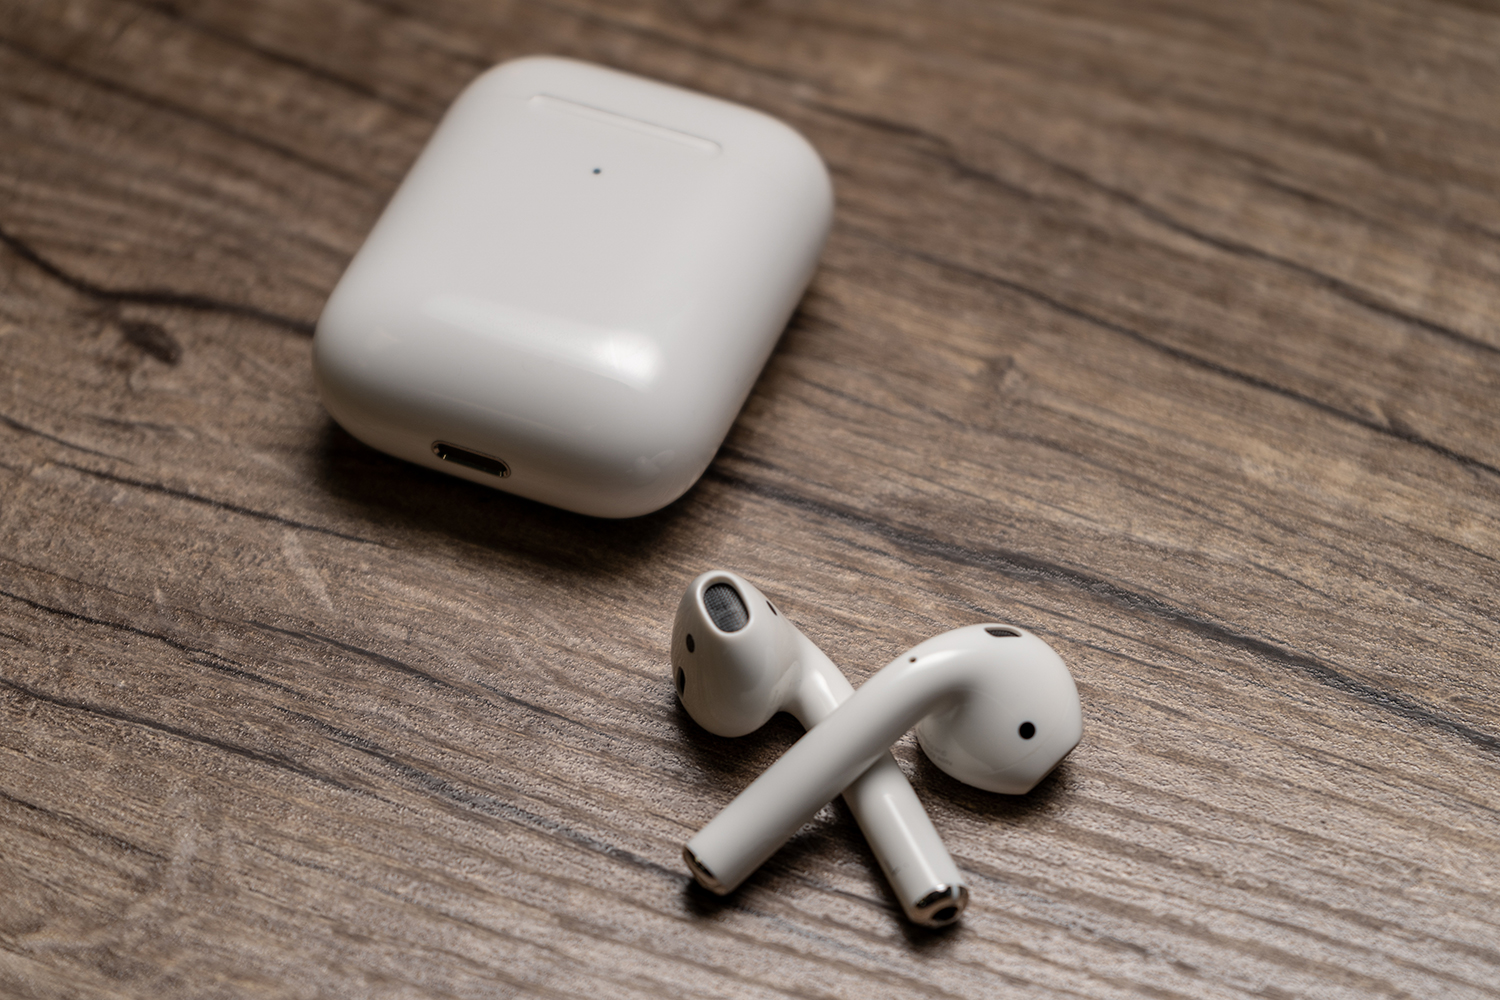 Apple AirPods placed on a table next to their charging case